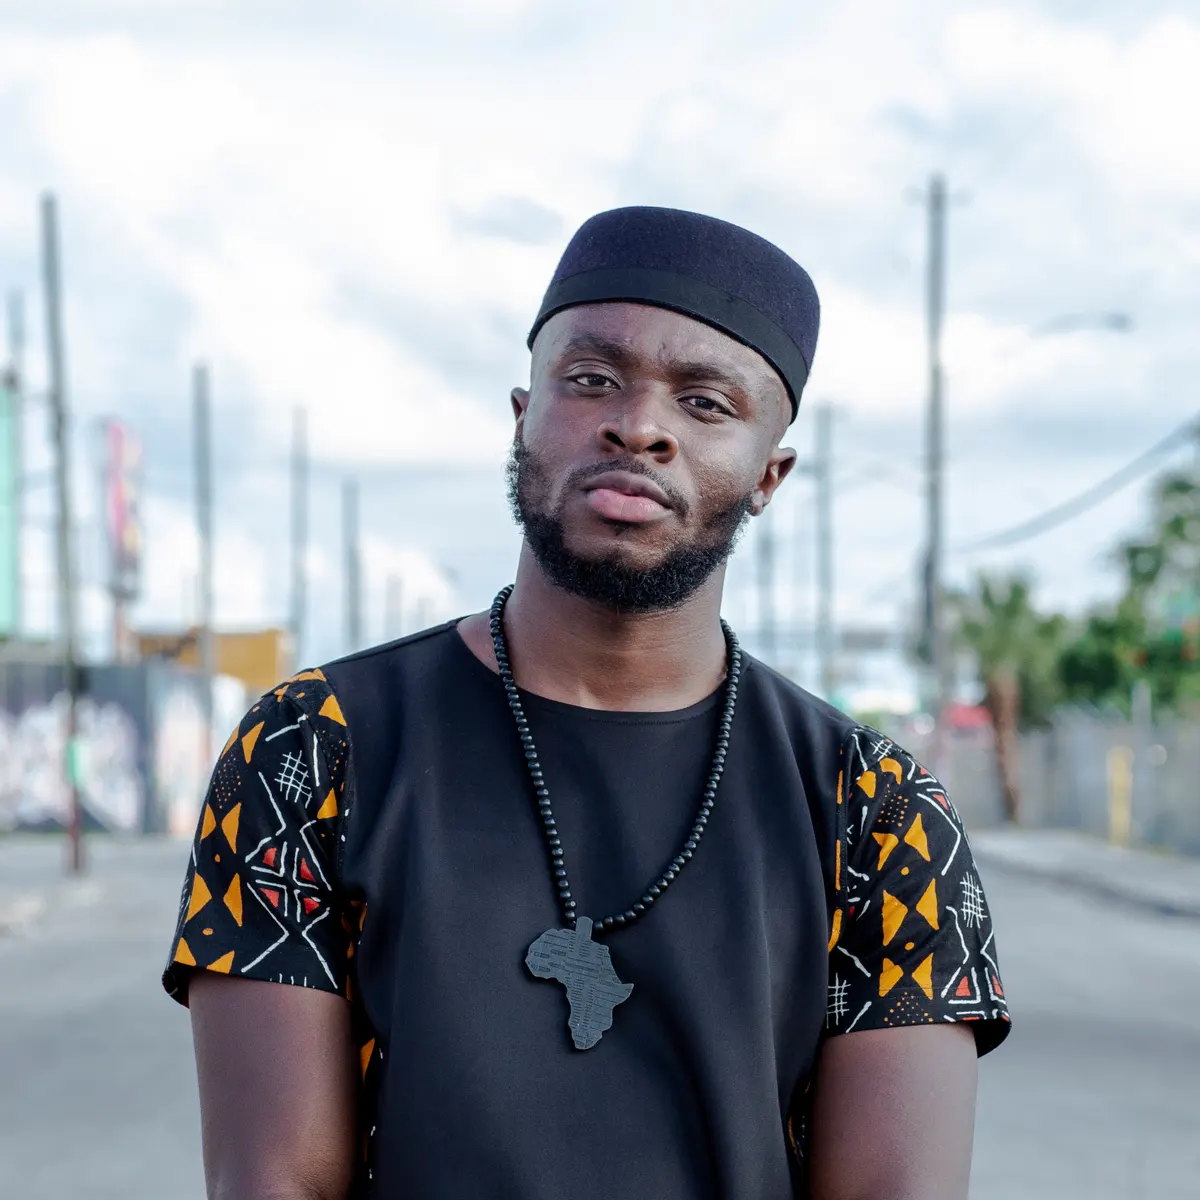 Fuse ODG Plans To Launch Educational App For African Children